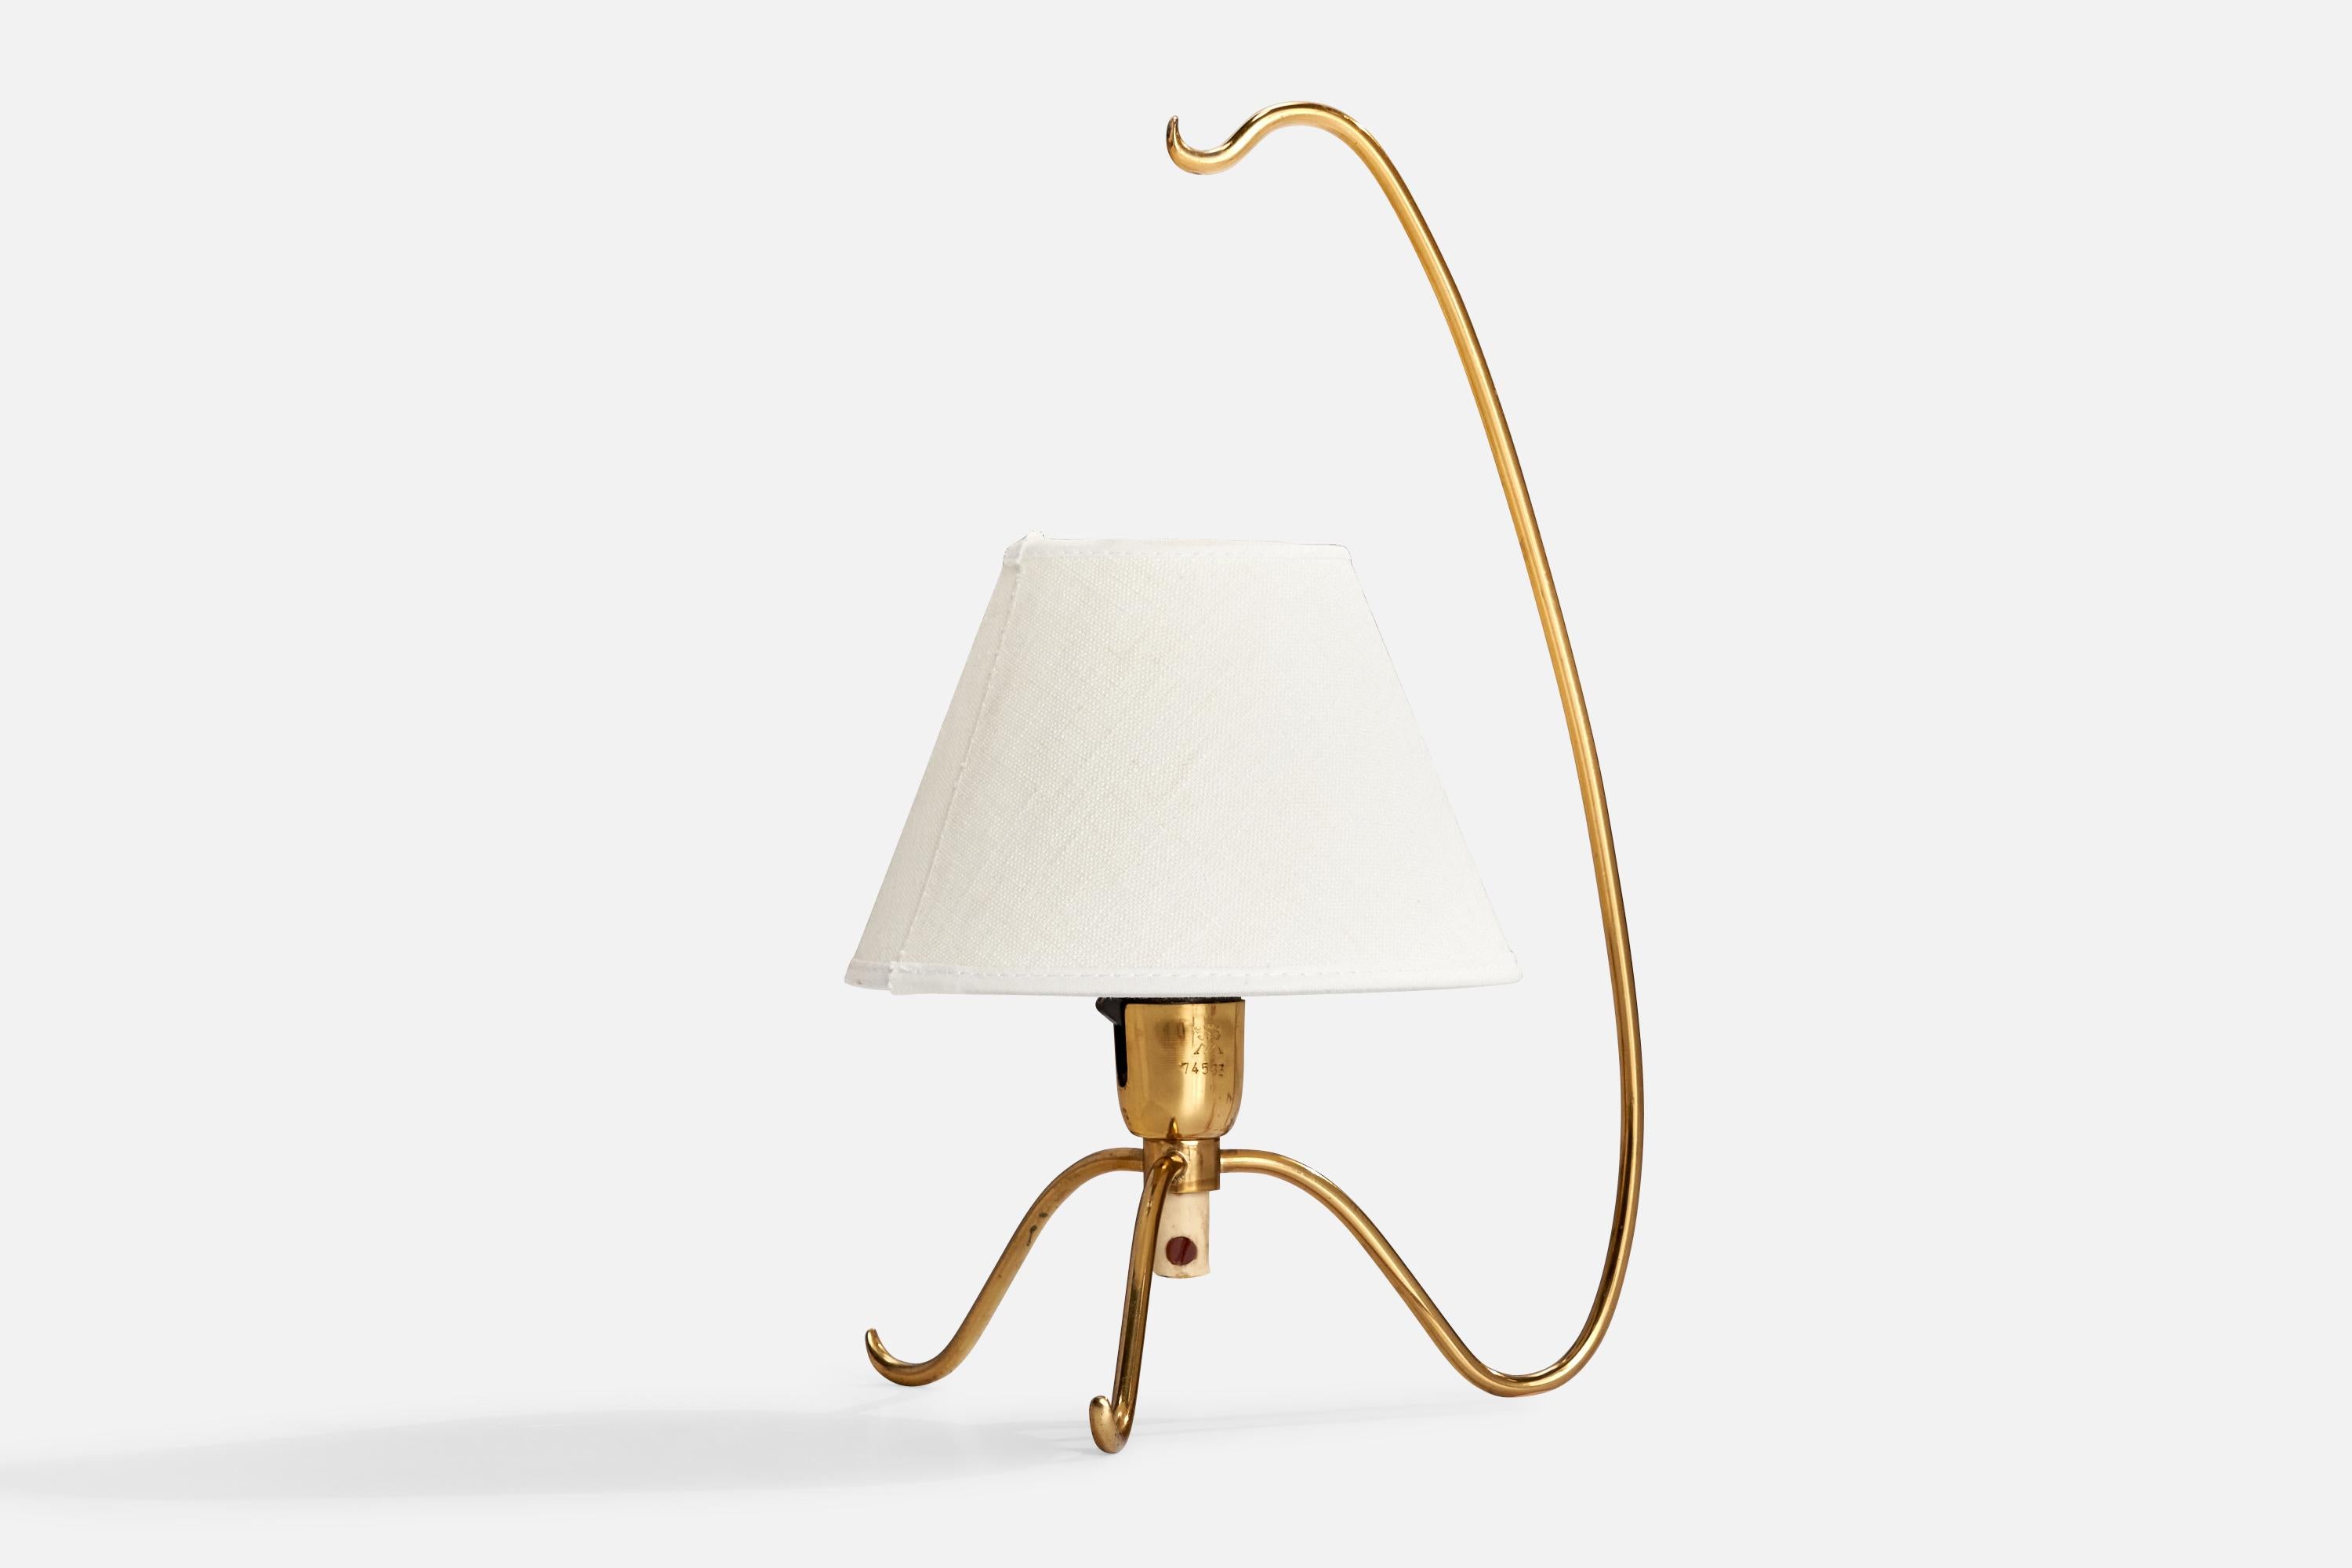 A brass and white fabric table lamp produced by Malmö Metallvarufabrik, Sweden, 1940s.

Overall Dimensions (inches): 13” H x 7” W x 8” D
Stated dimensions include shade.
Bulb Specifications: E-14 Bulb
Number of Sockets: 1
All lighting will be